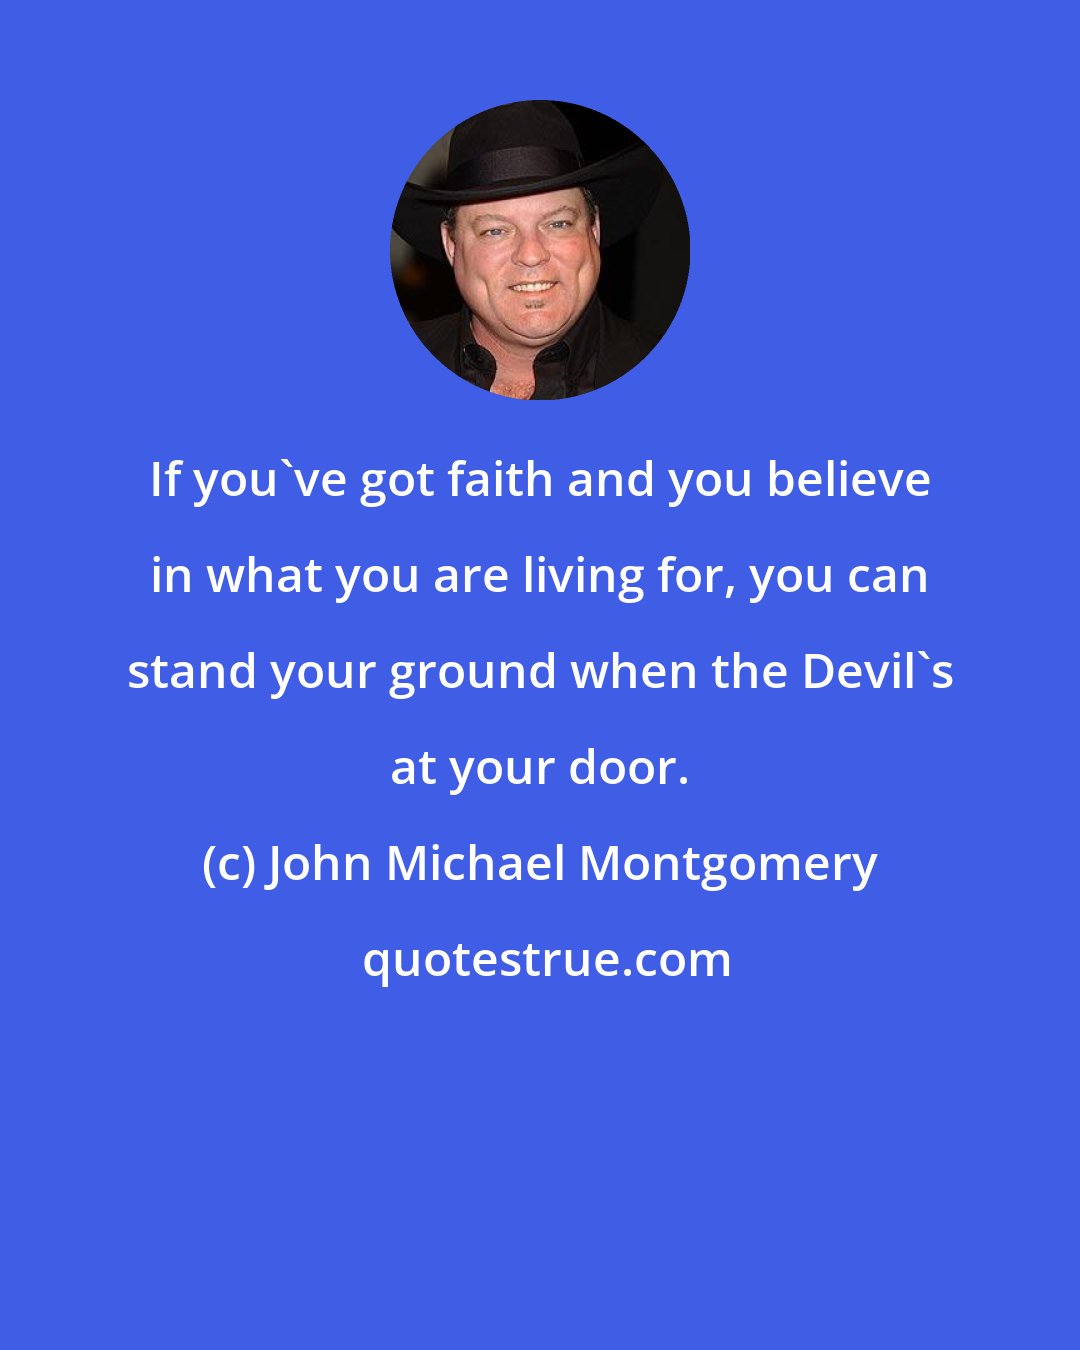 John Michael Montgomery: If you've got faith and you believe in what you are living for, you can stand your ground when the Devil's at your door.